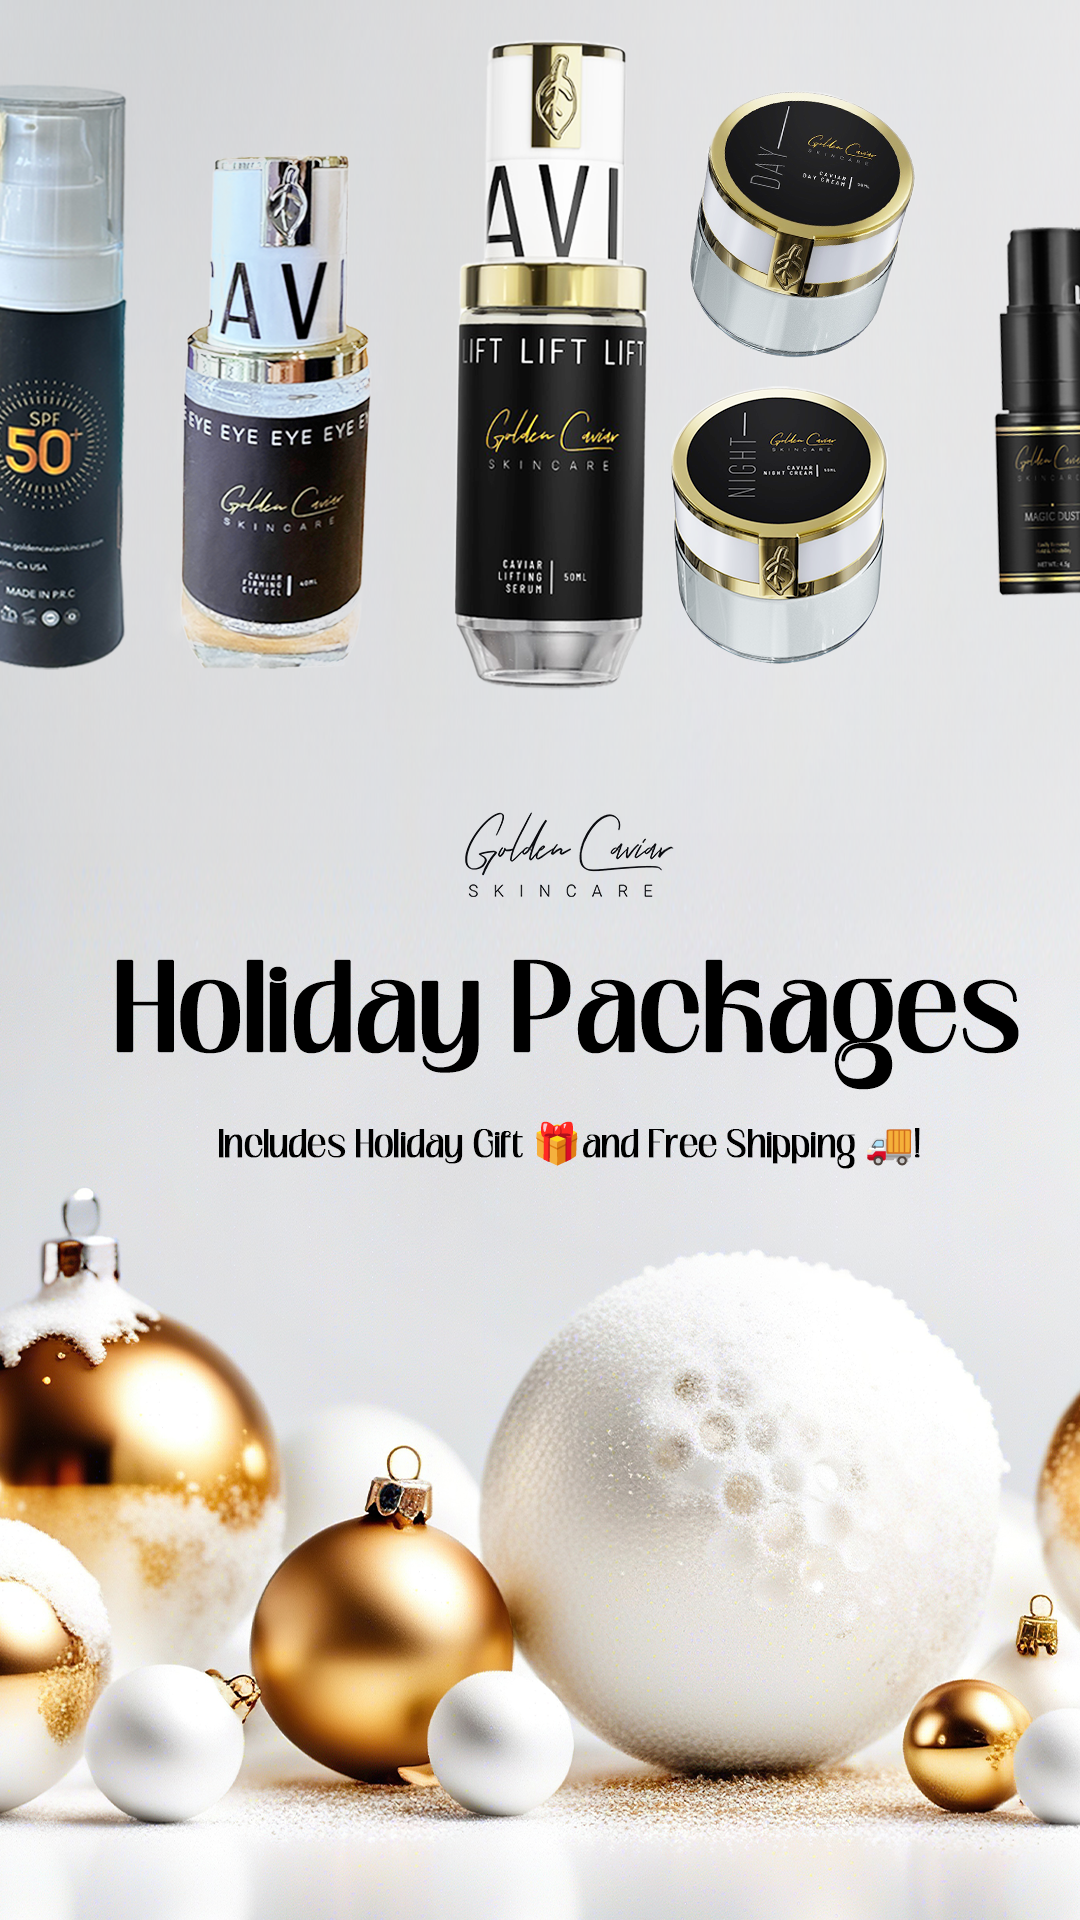 Value Packages